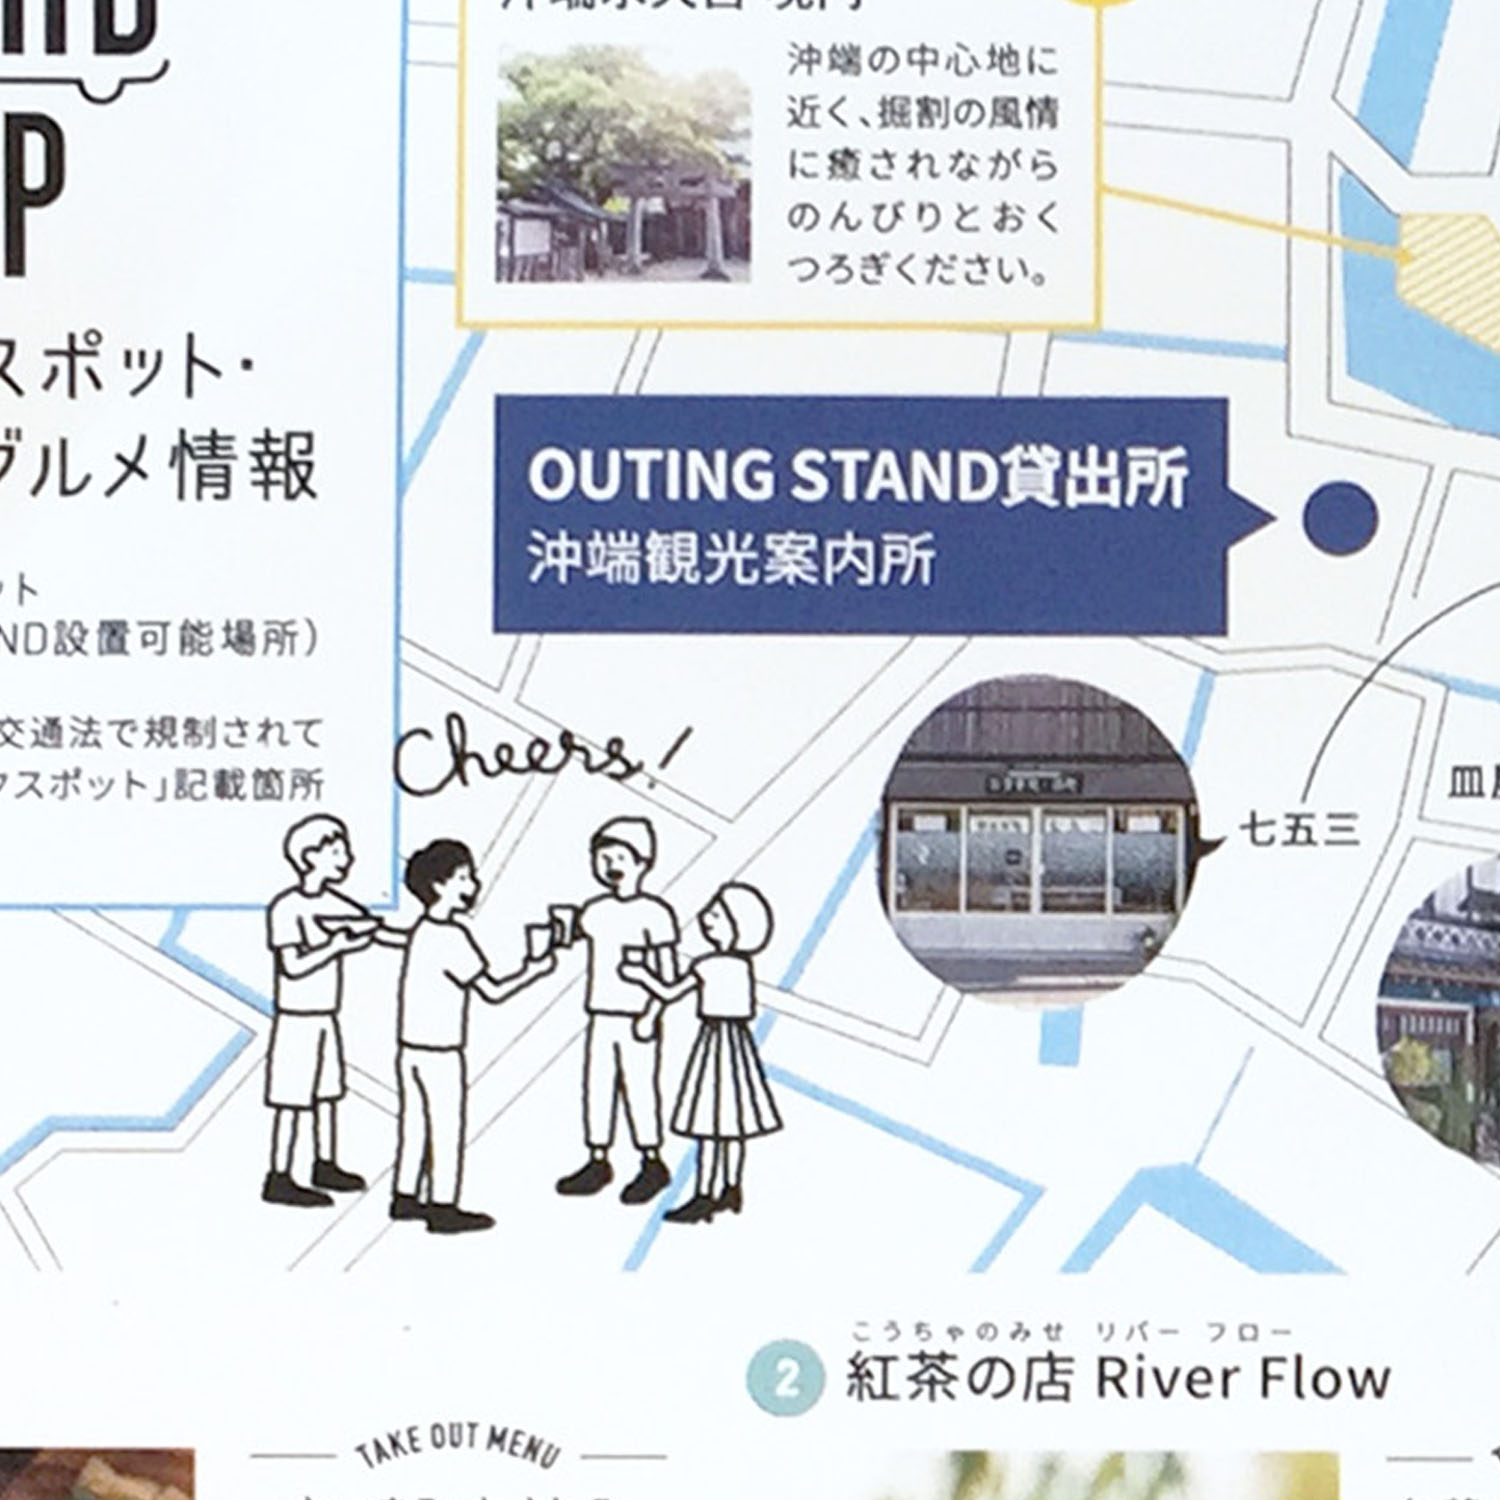 OUTING STAND イラスト